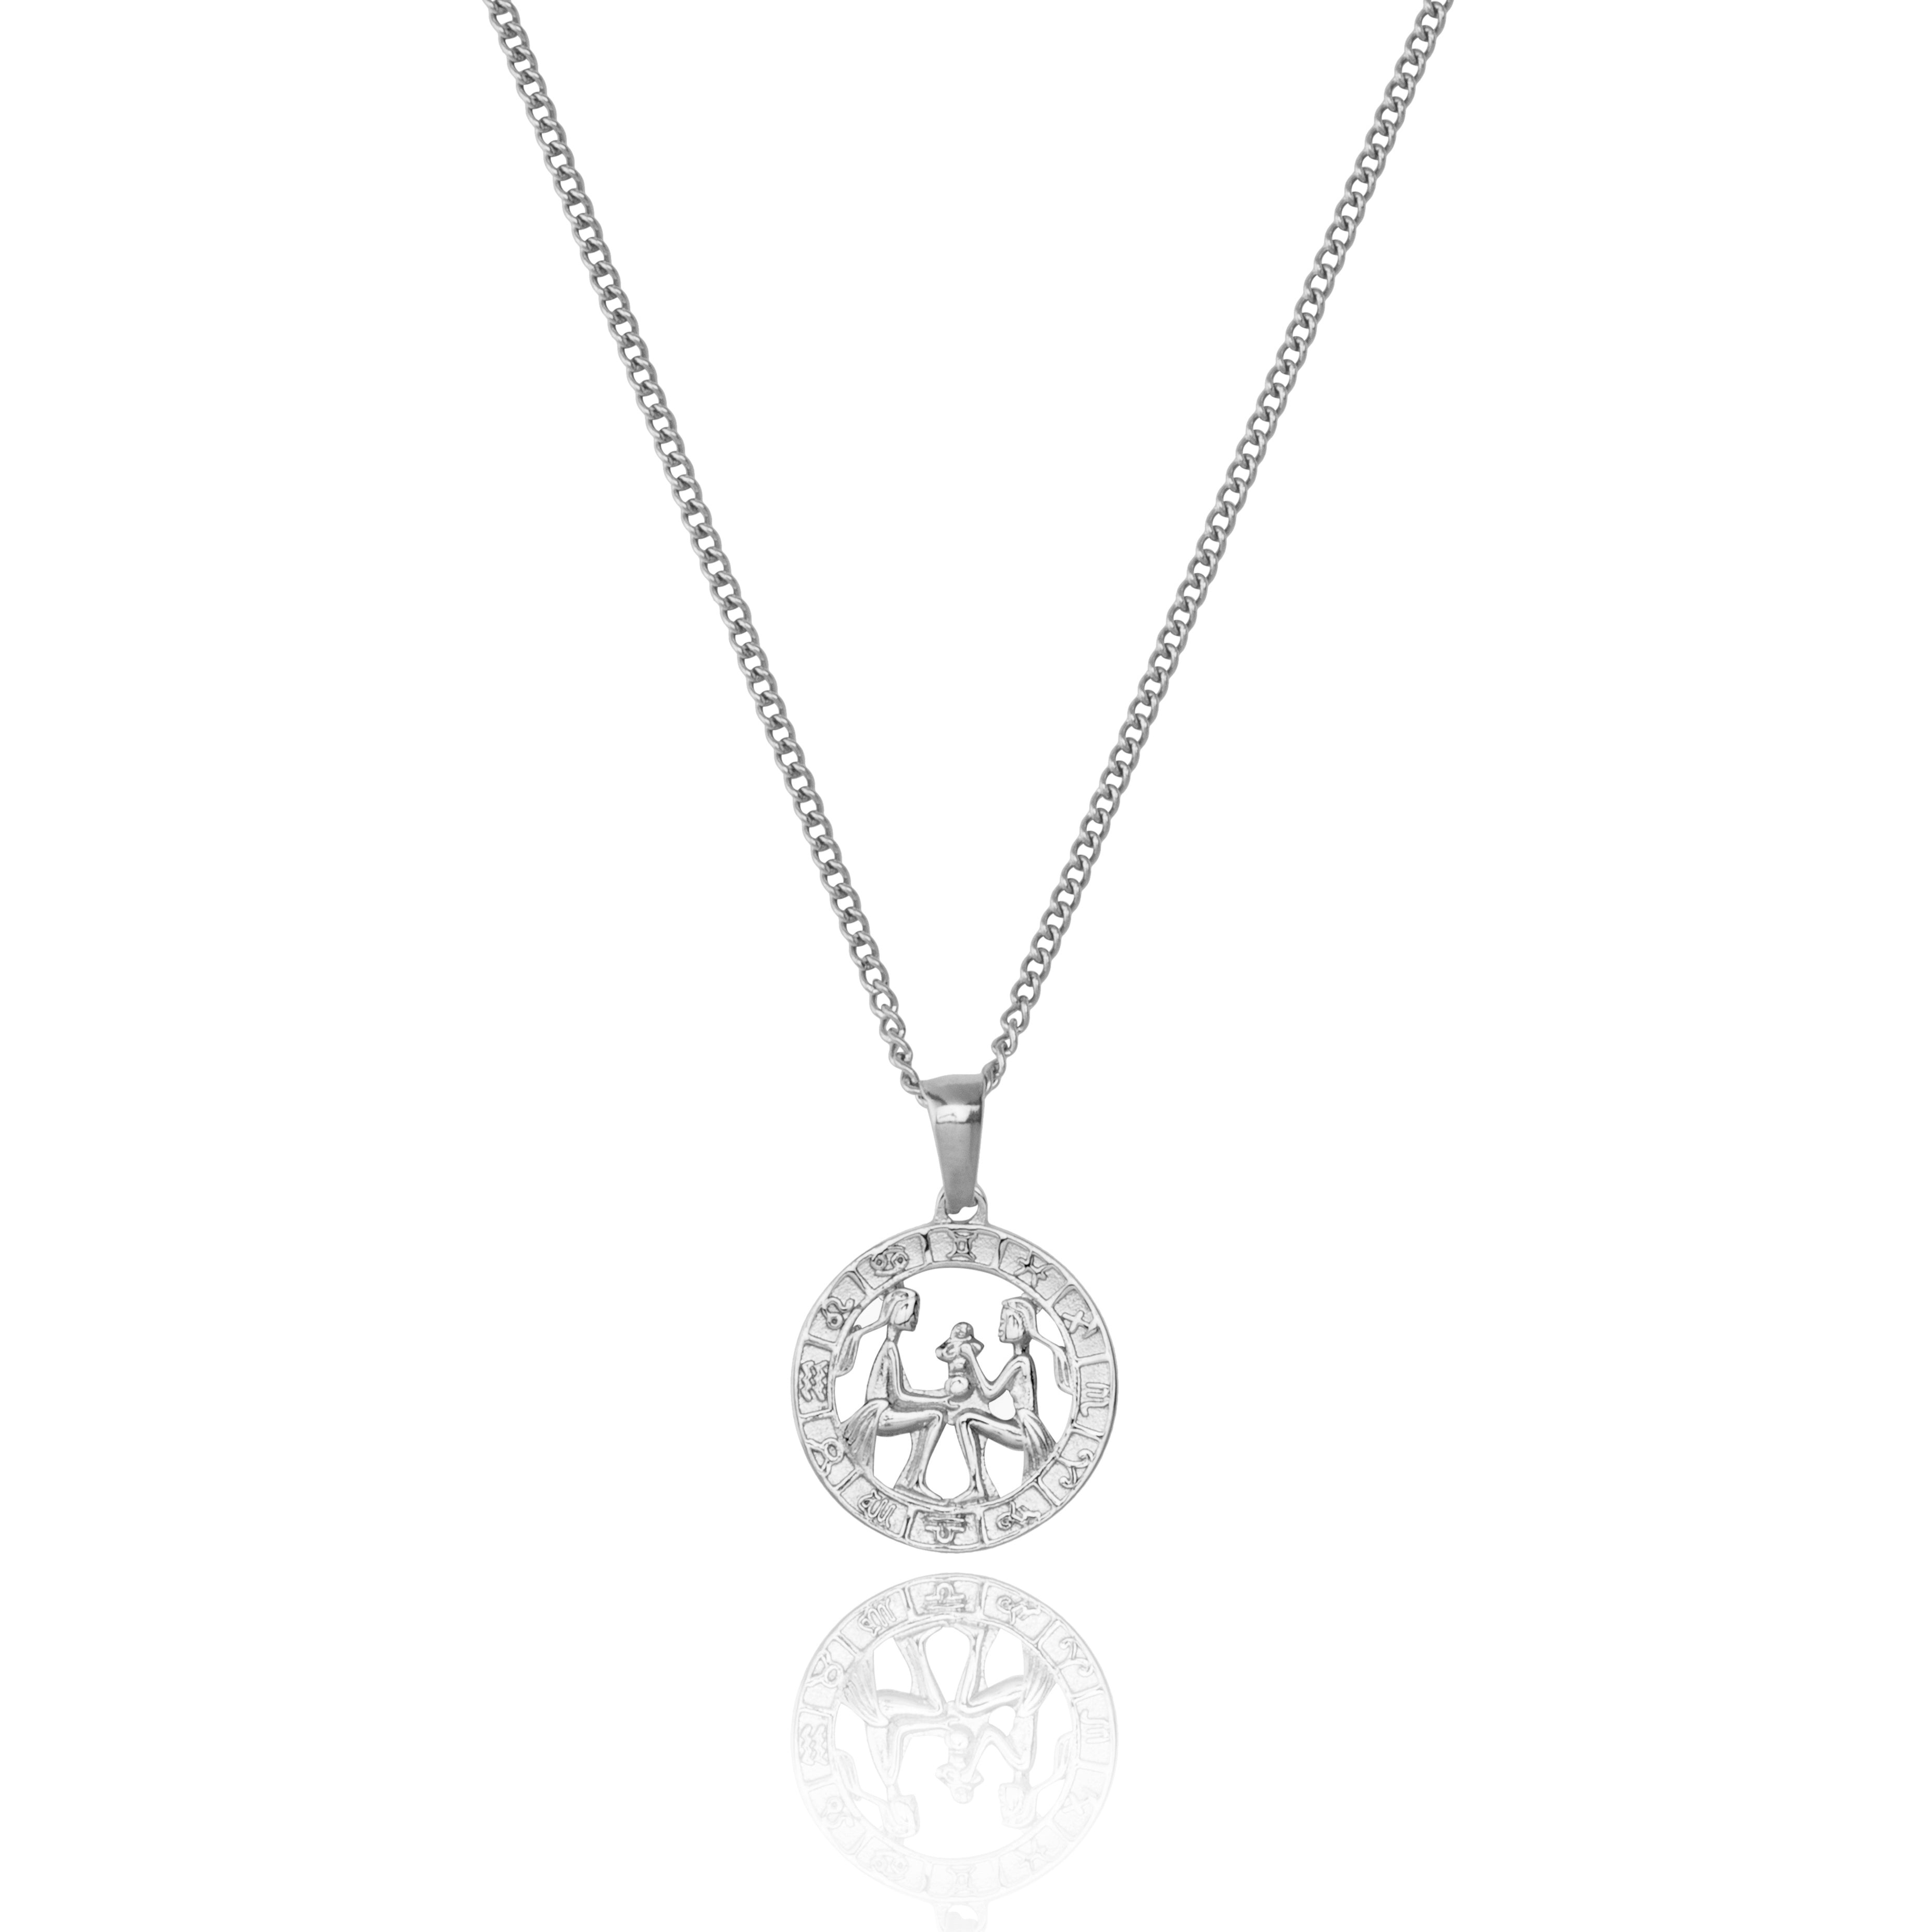 Premium 316L Stainless Steel Coated Gemini Zodiac Pendant and Chain